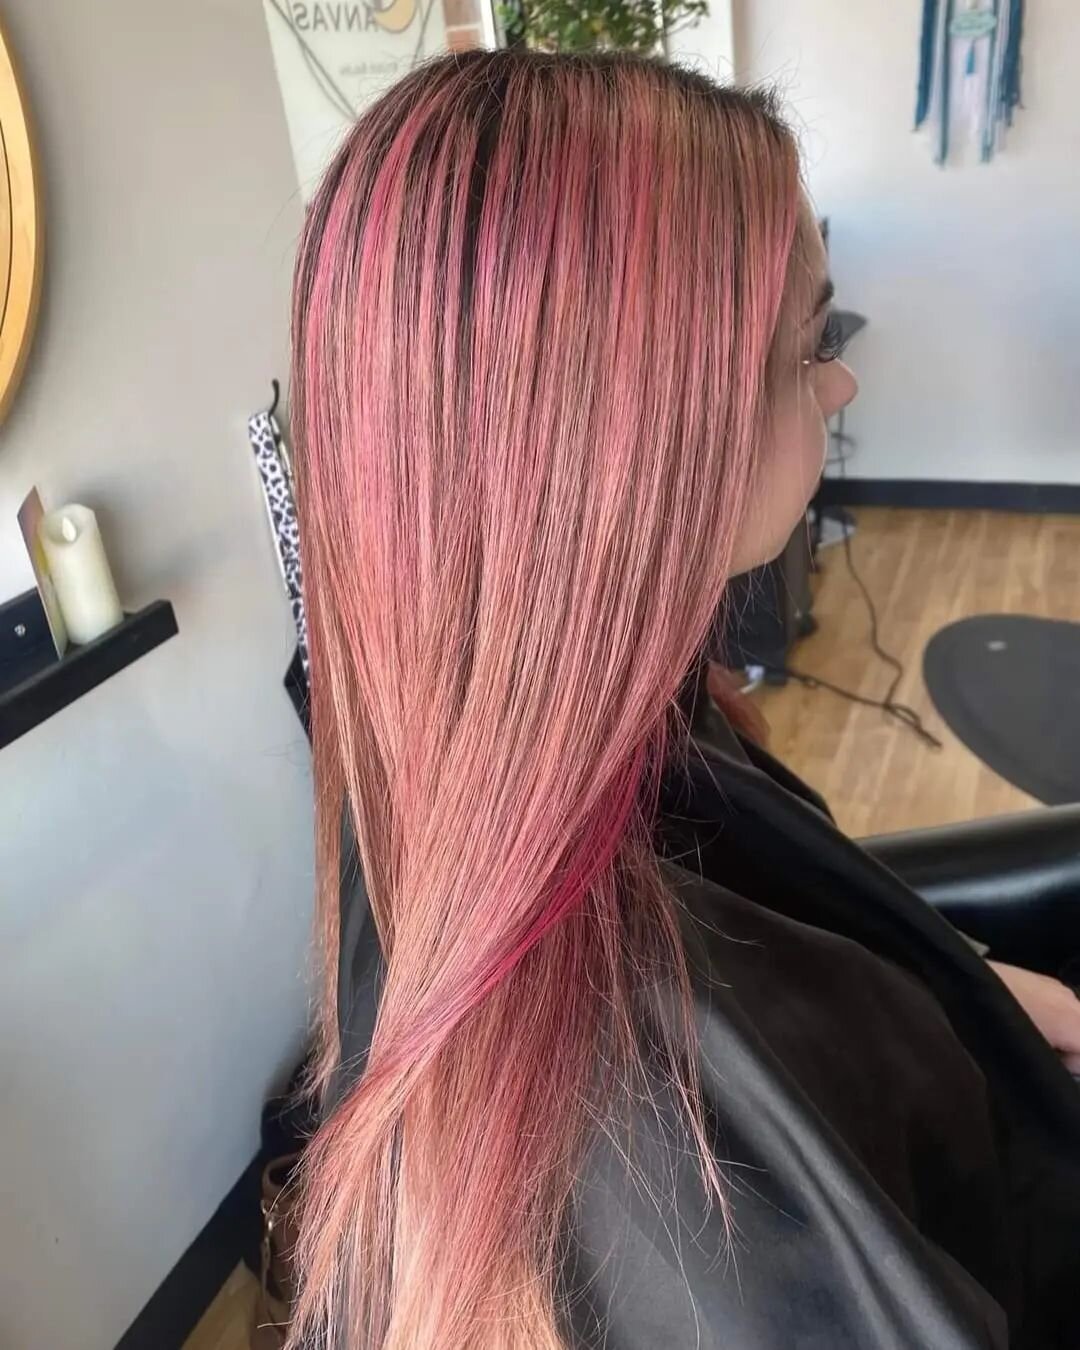 Stunning Rosewater color on this lovely client🌹🥀🩷
@hairbylizzymoelder 
#pinkhair #fashioncolor #longhair #canvasstudiosalonbing #binghamtonuniversity